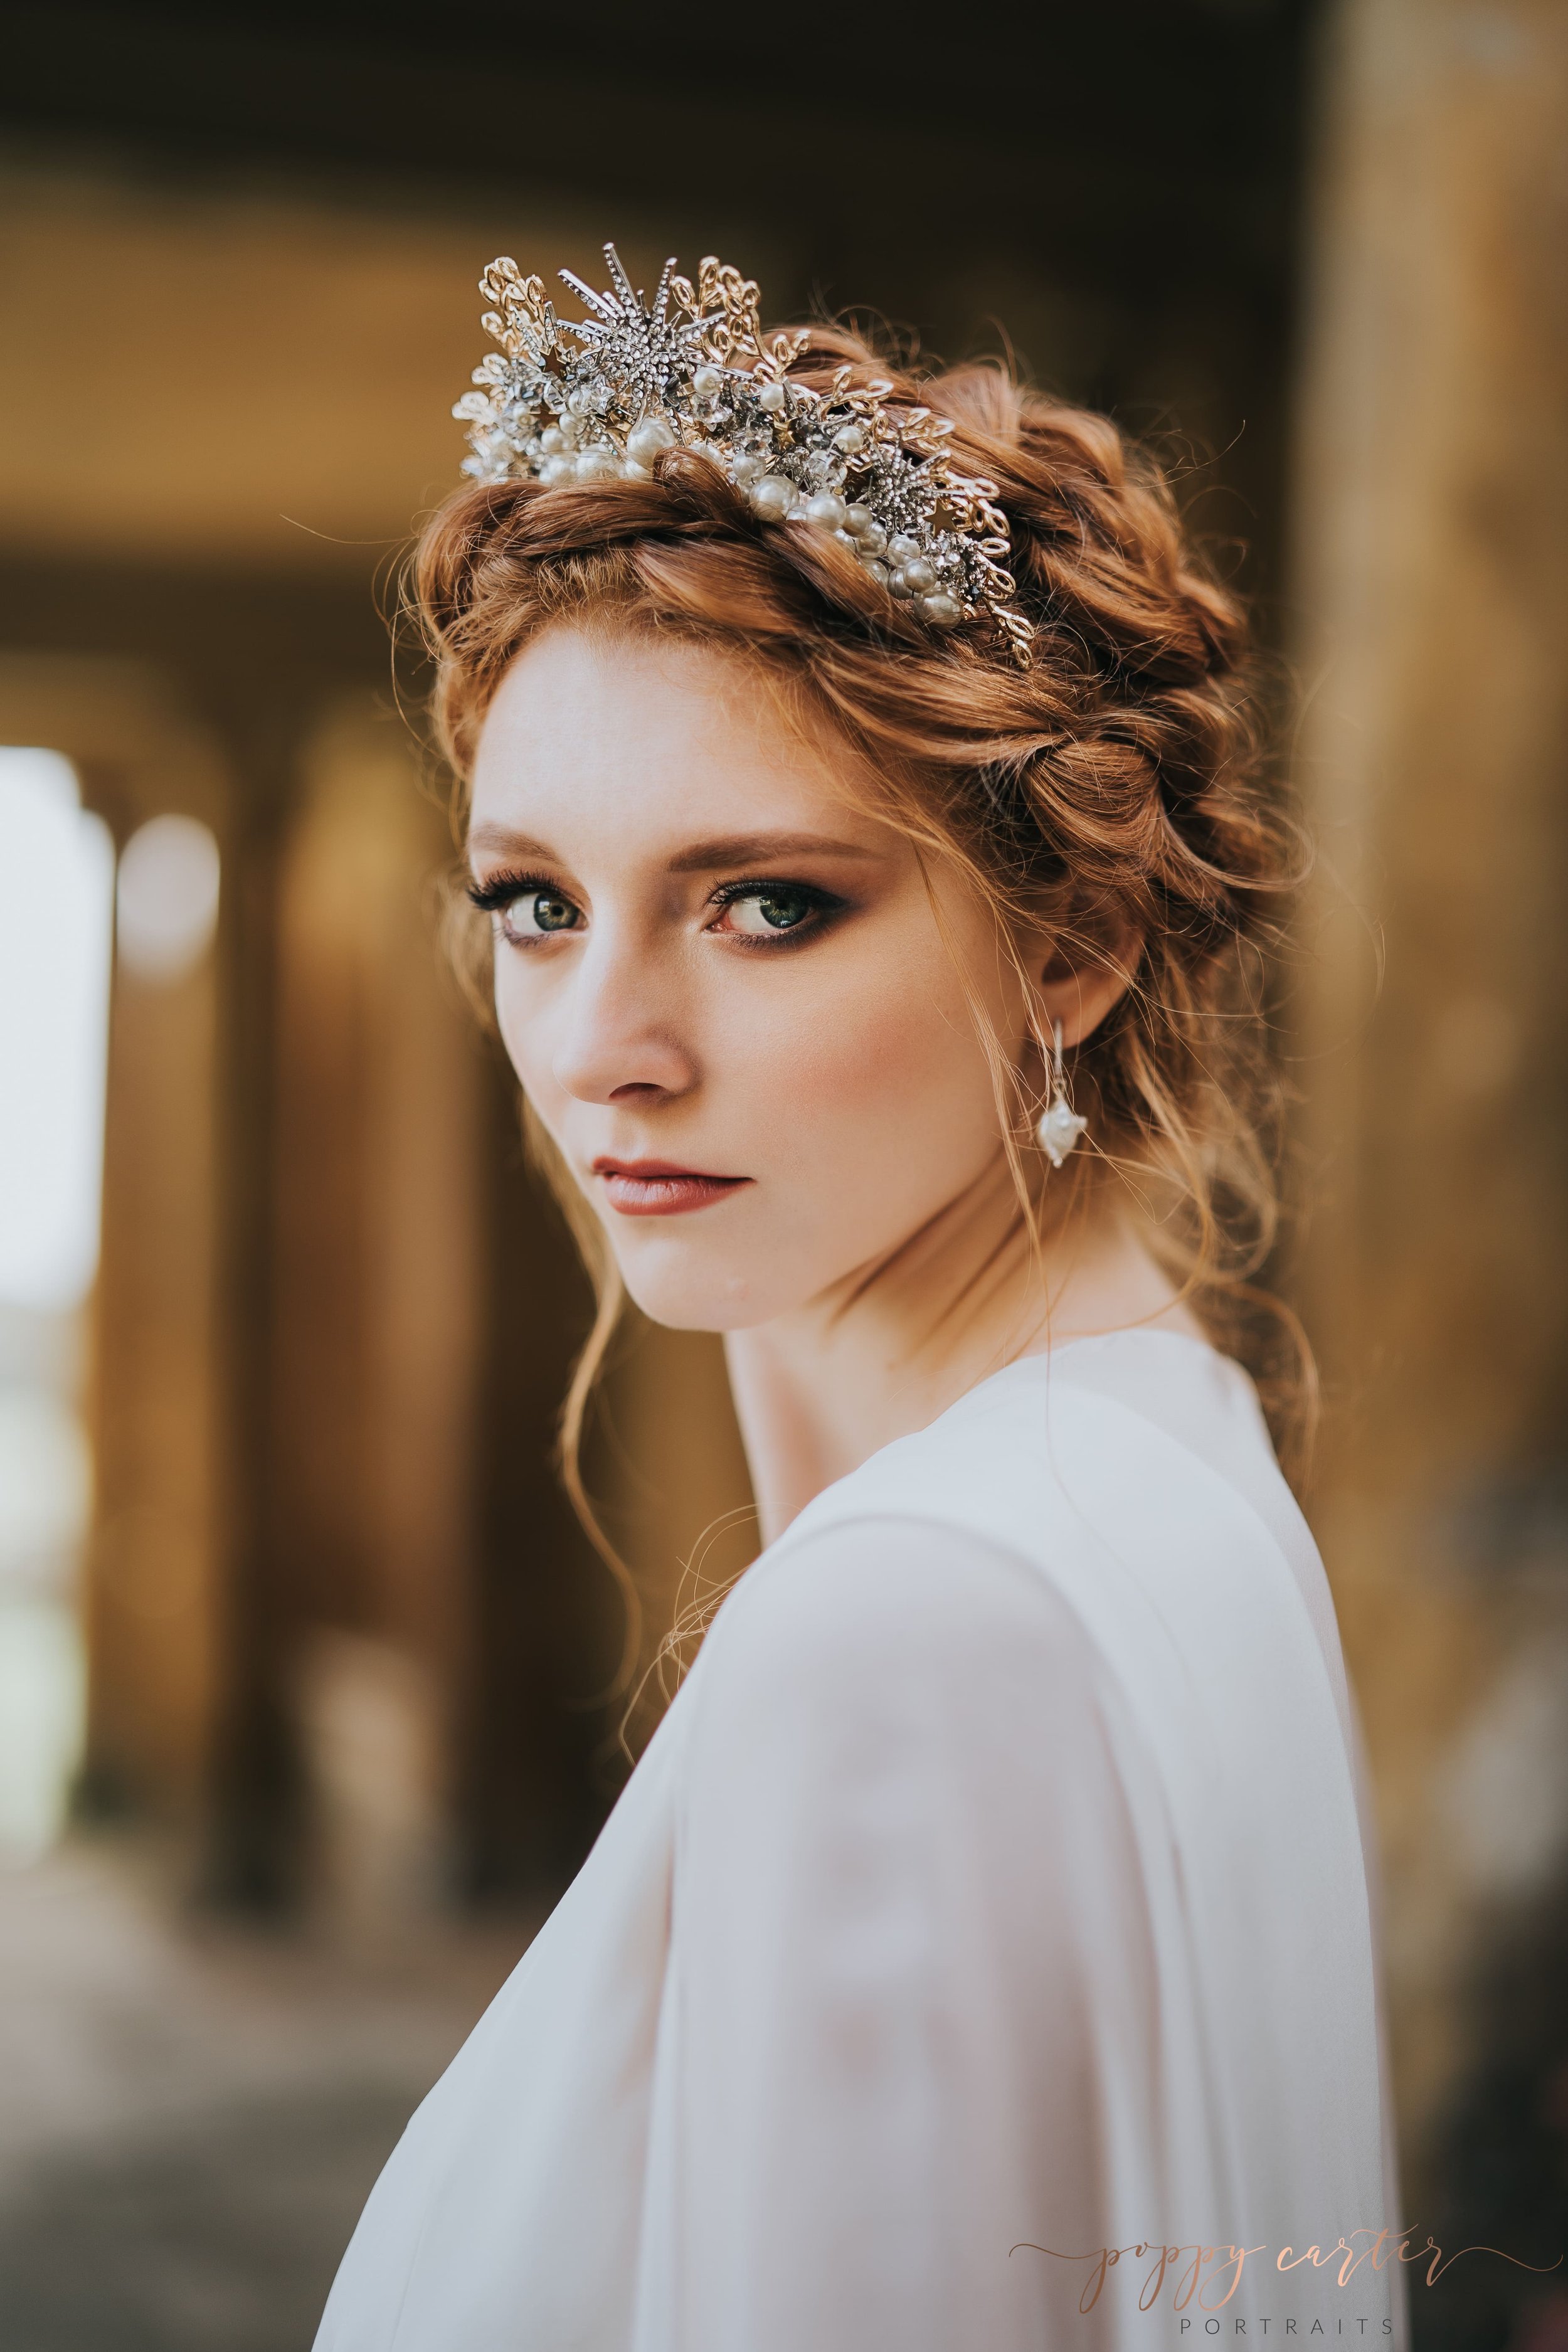 Stunning red haired bride in bridal crown